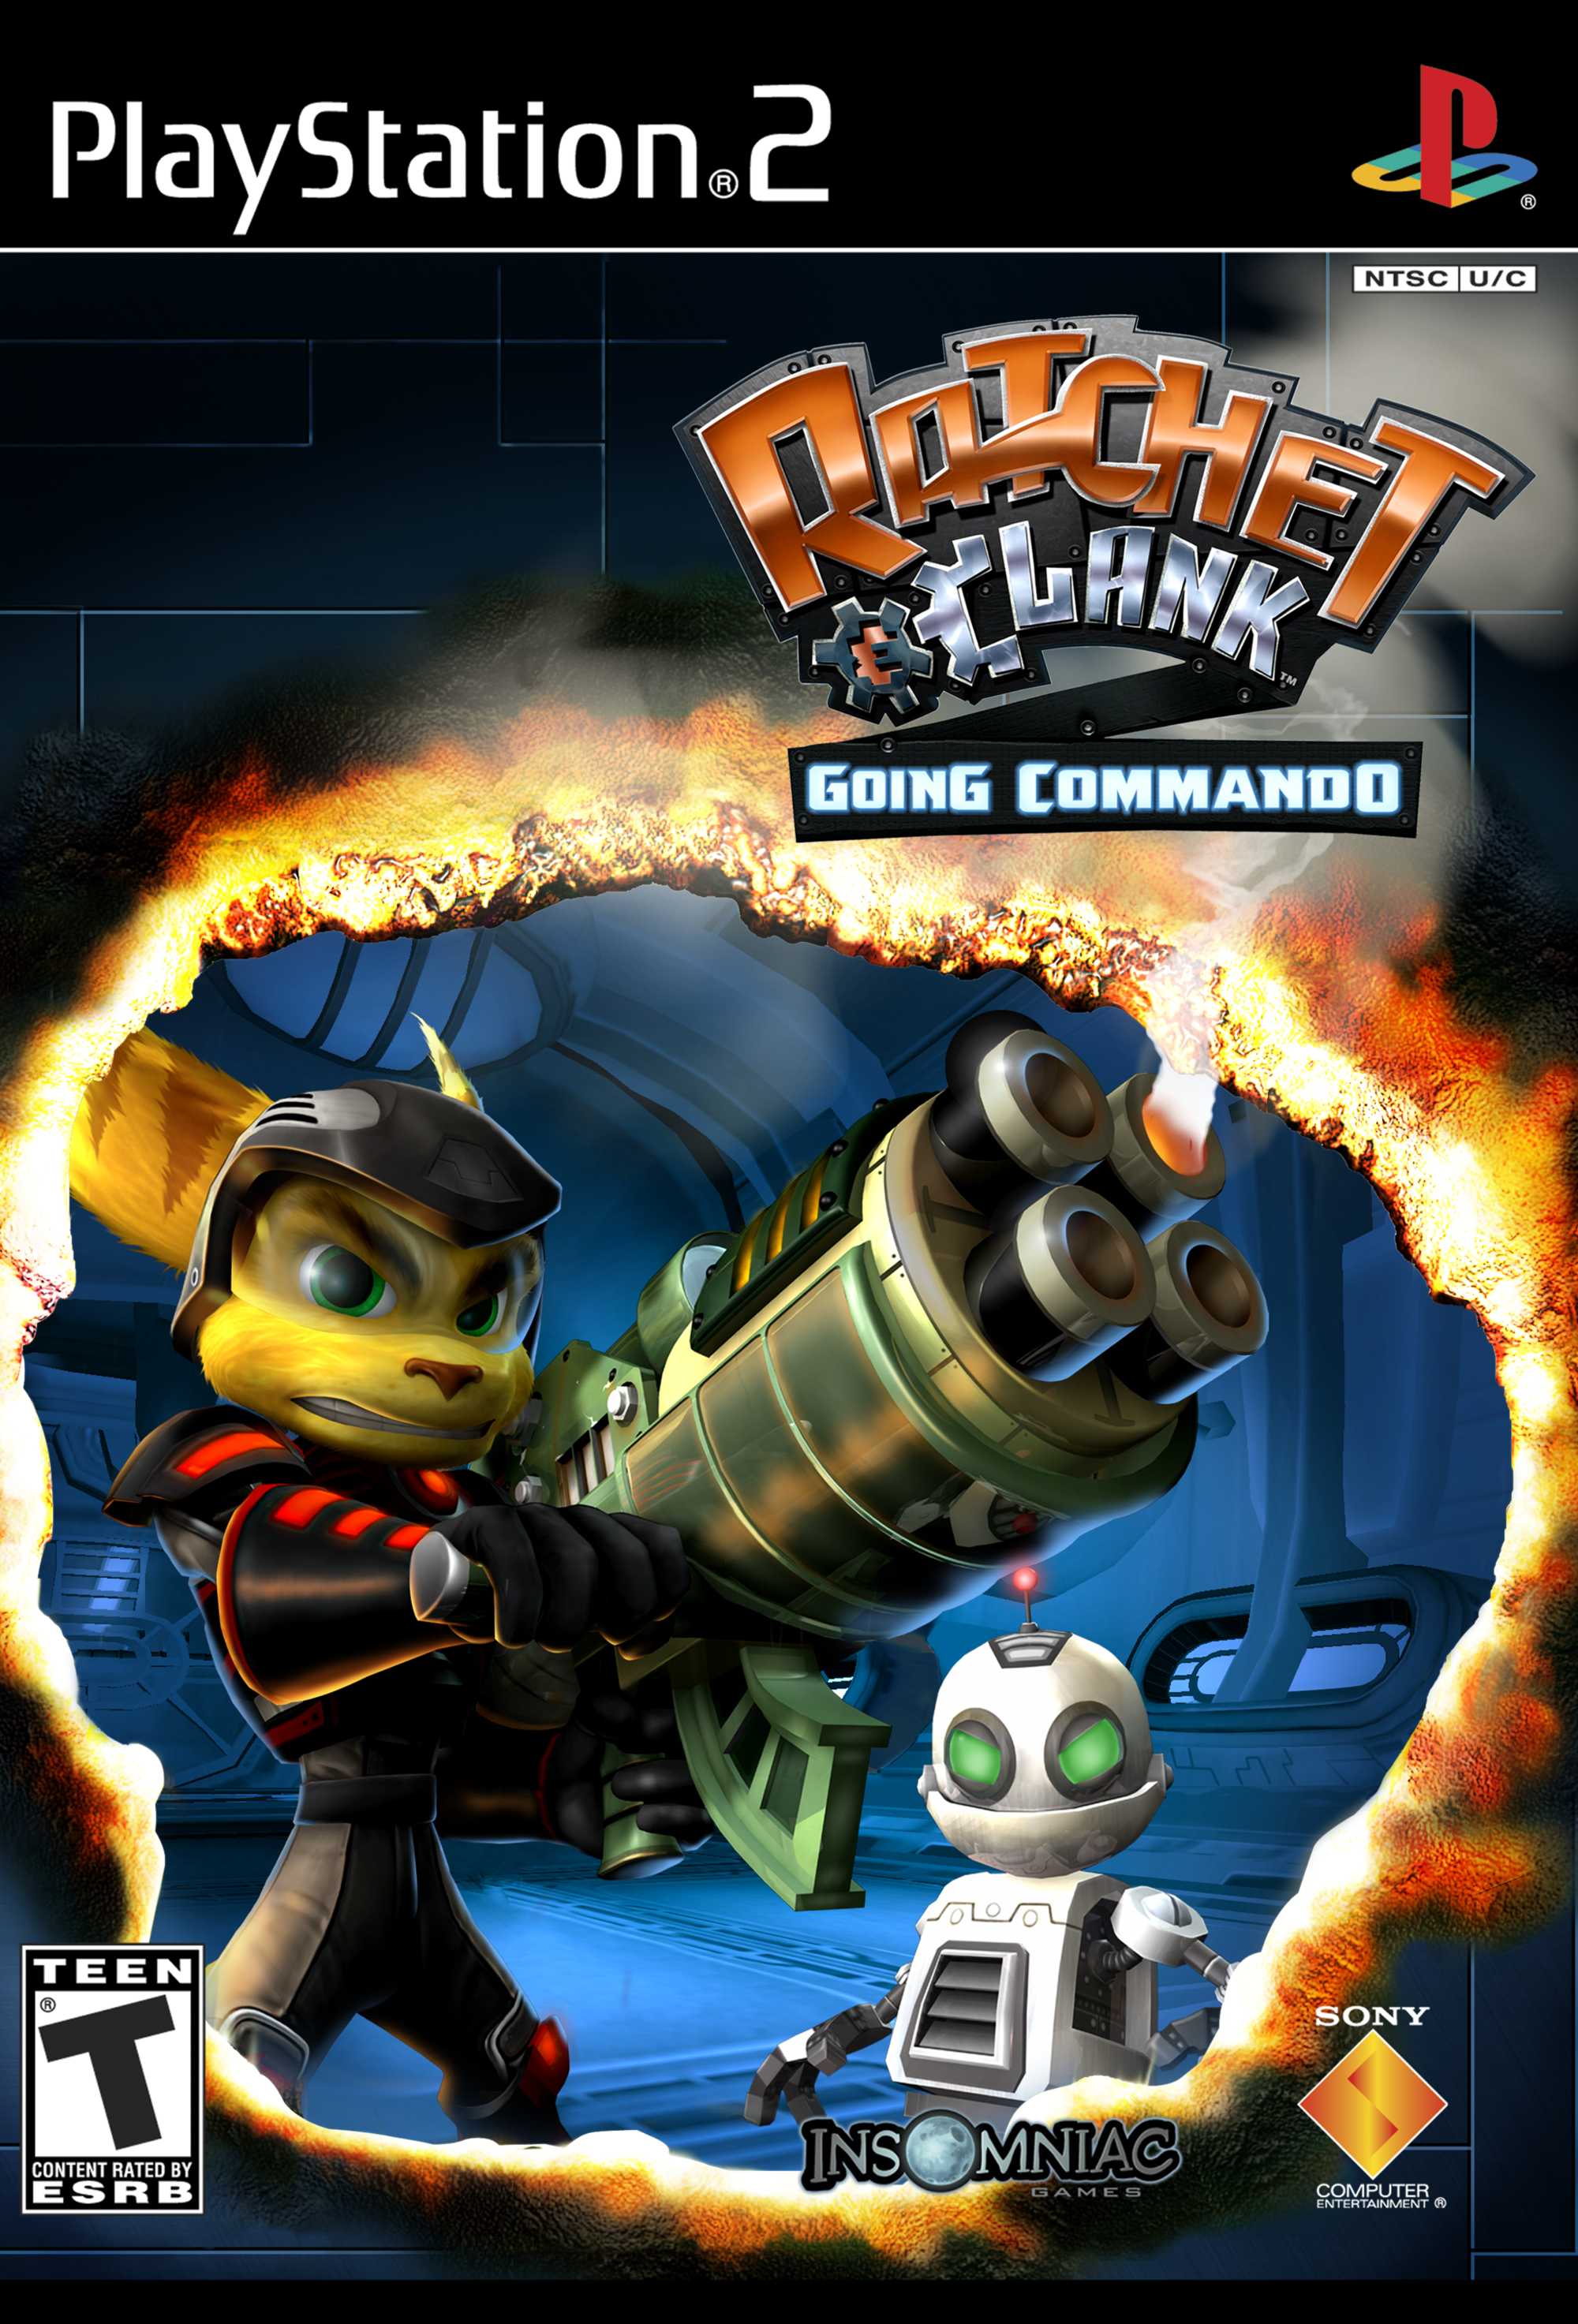 Ratchet And Clank PS2 Box Art